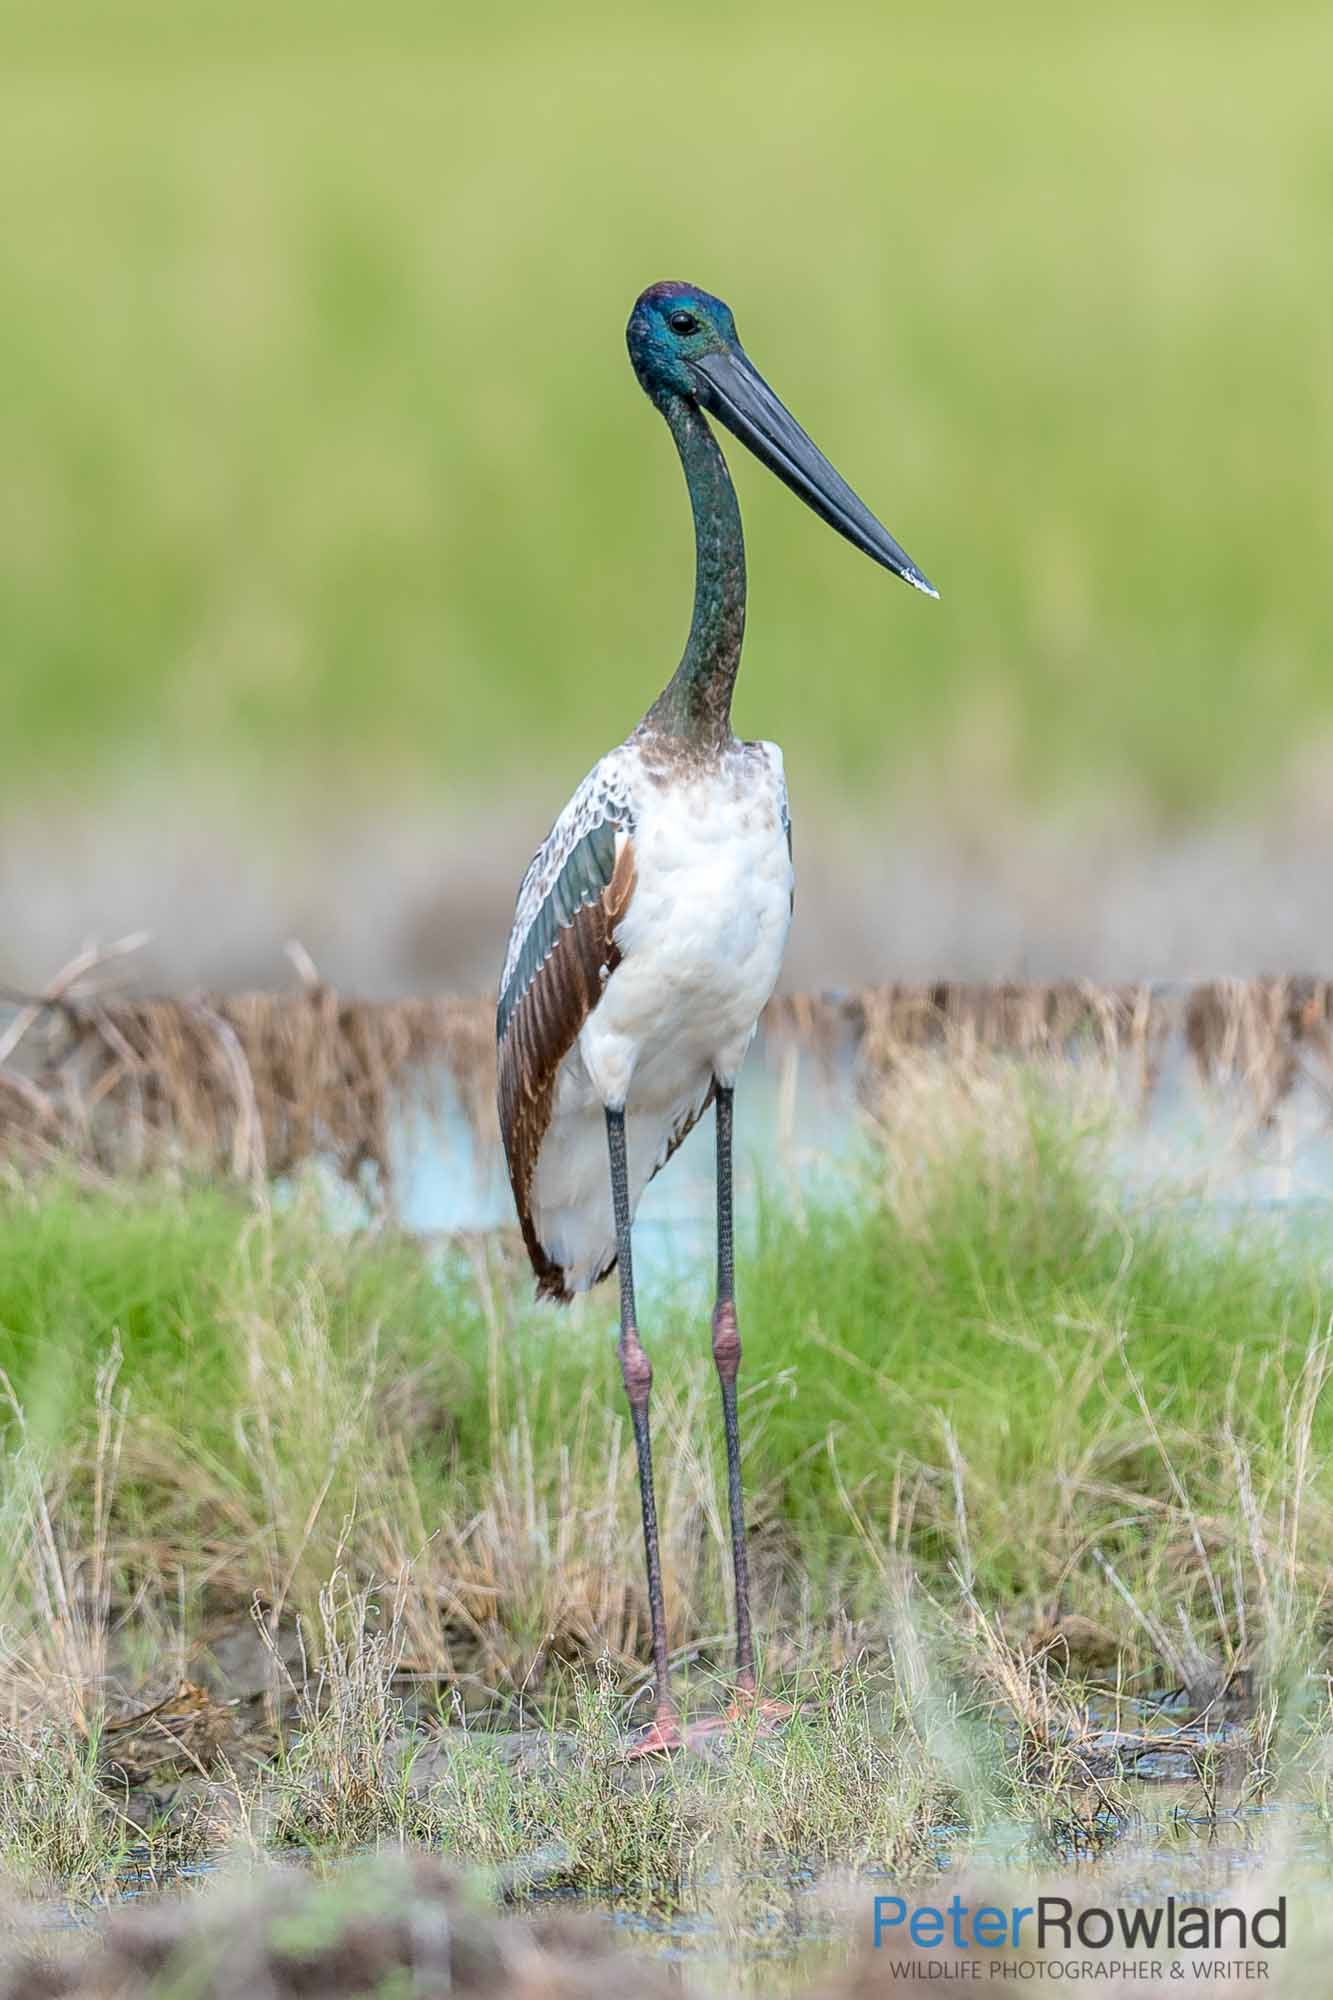 A Black-necked Stork standing in a grassy clearing